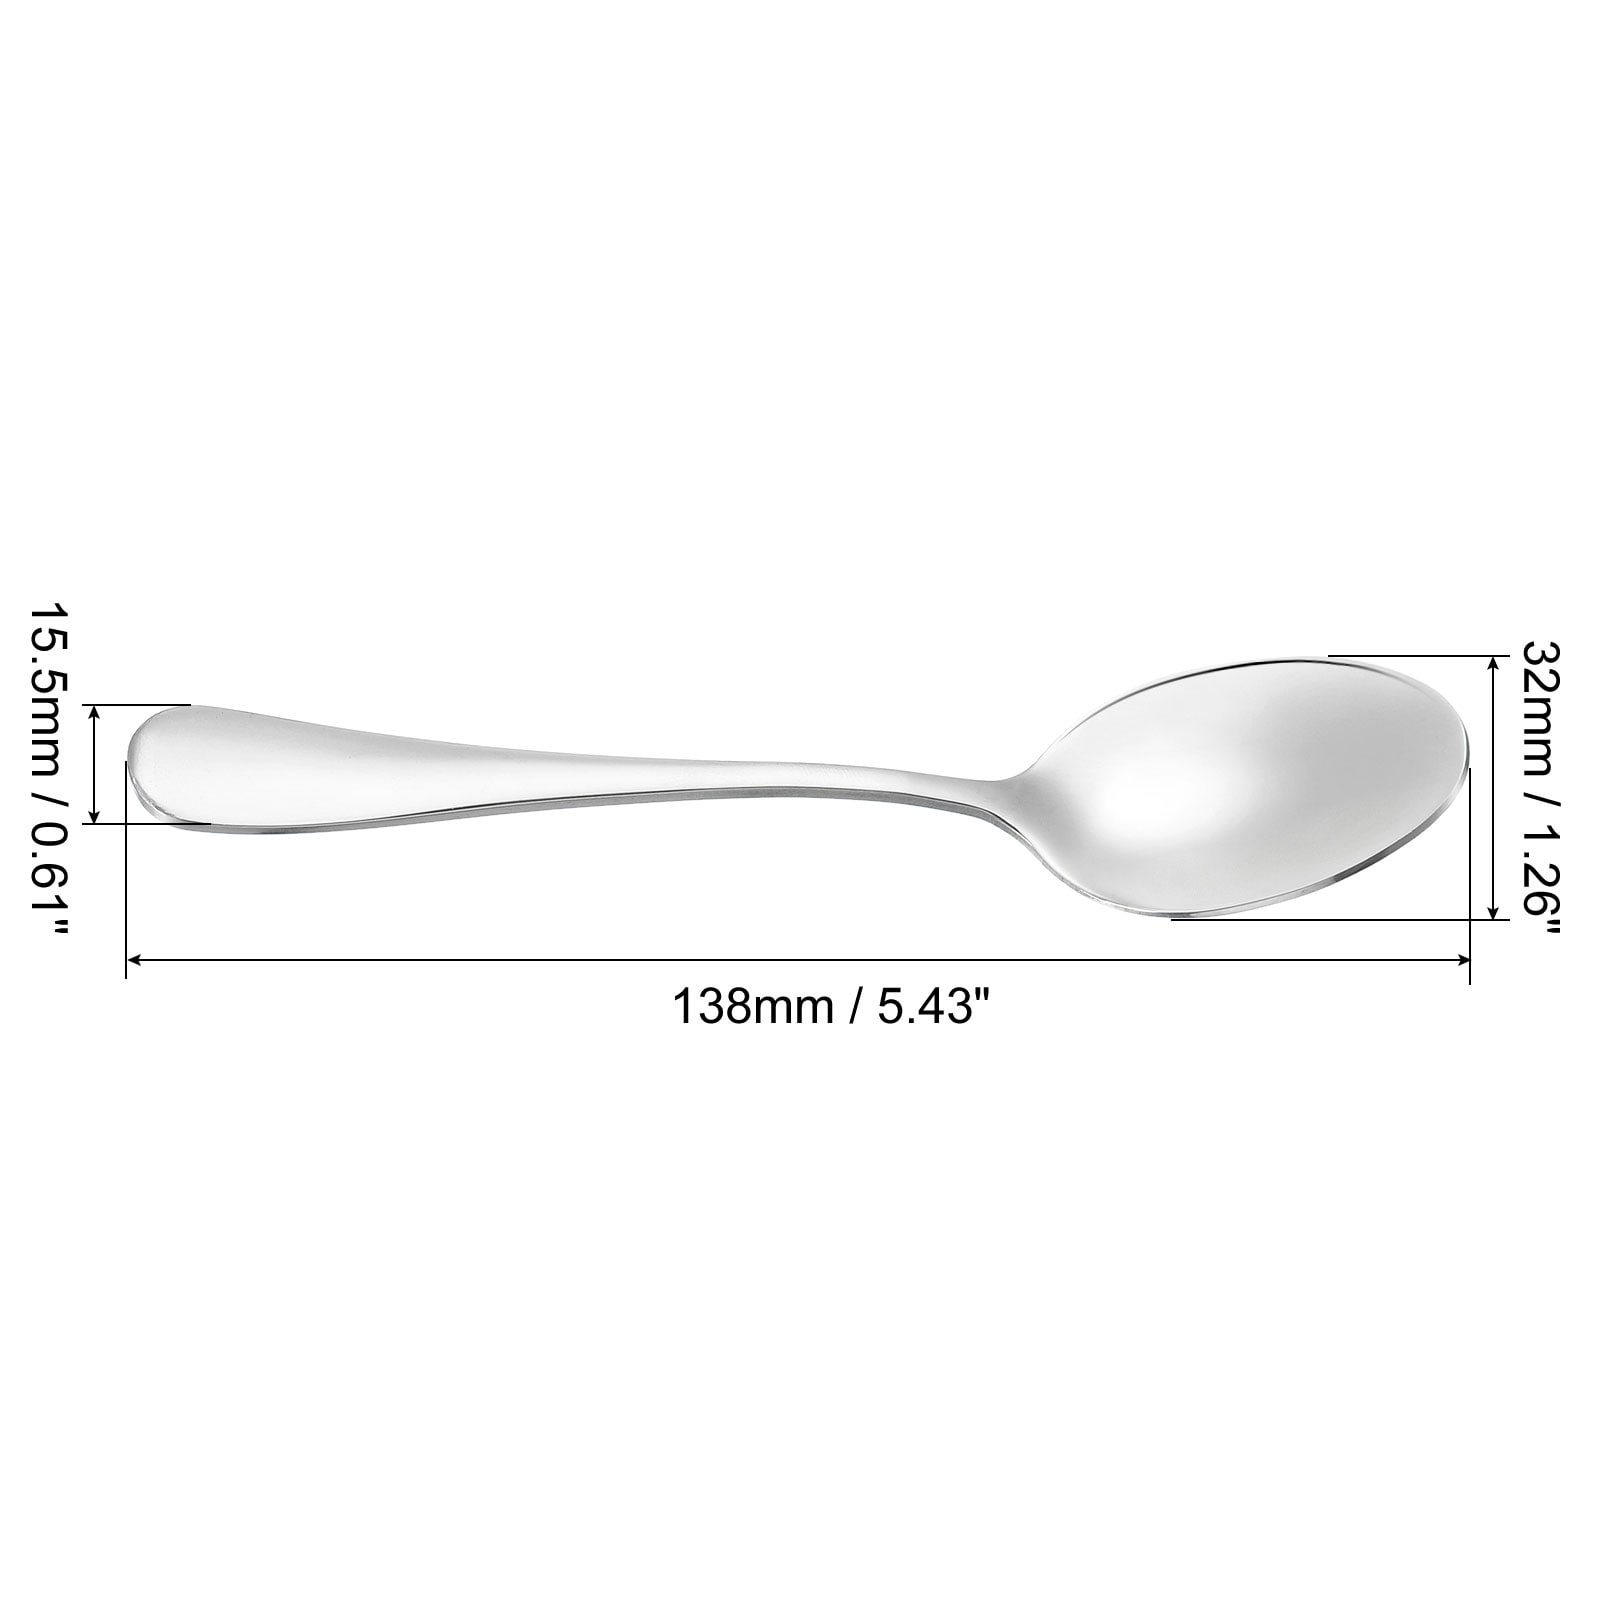 https://ak1.ostkcdn.com/images/products/is/images/direct/02bbee13c95135d4142851757b5df8a8d75810fe/Metal-Spoons-Stainless-Steel-Spoon-for-Home-Kitchen.jpg